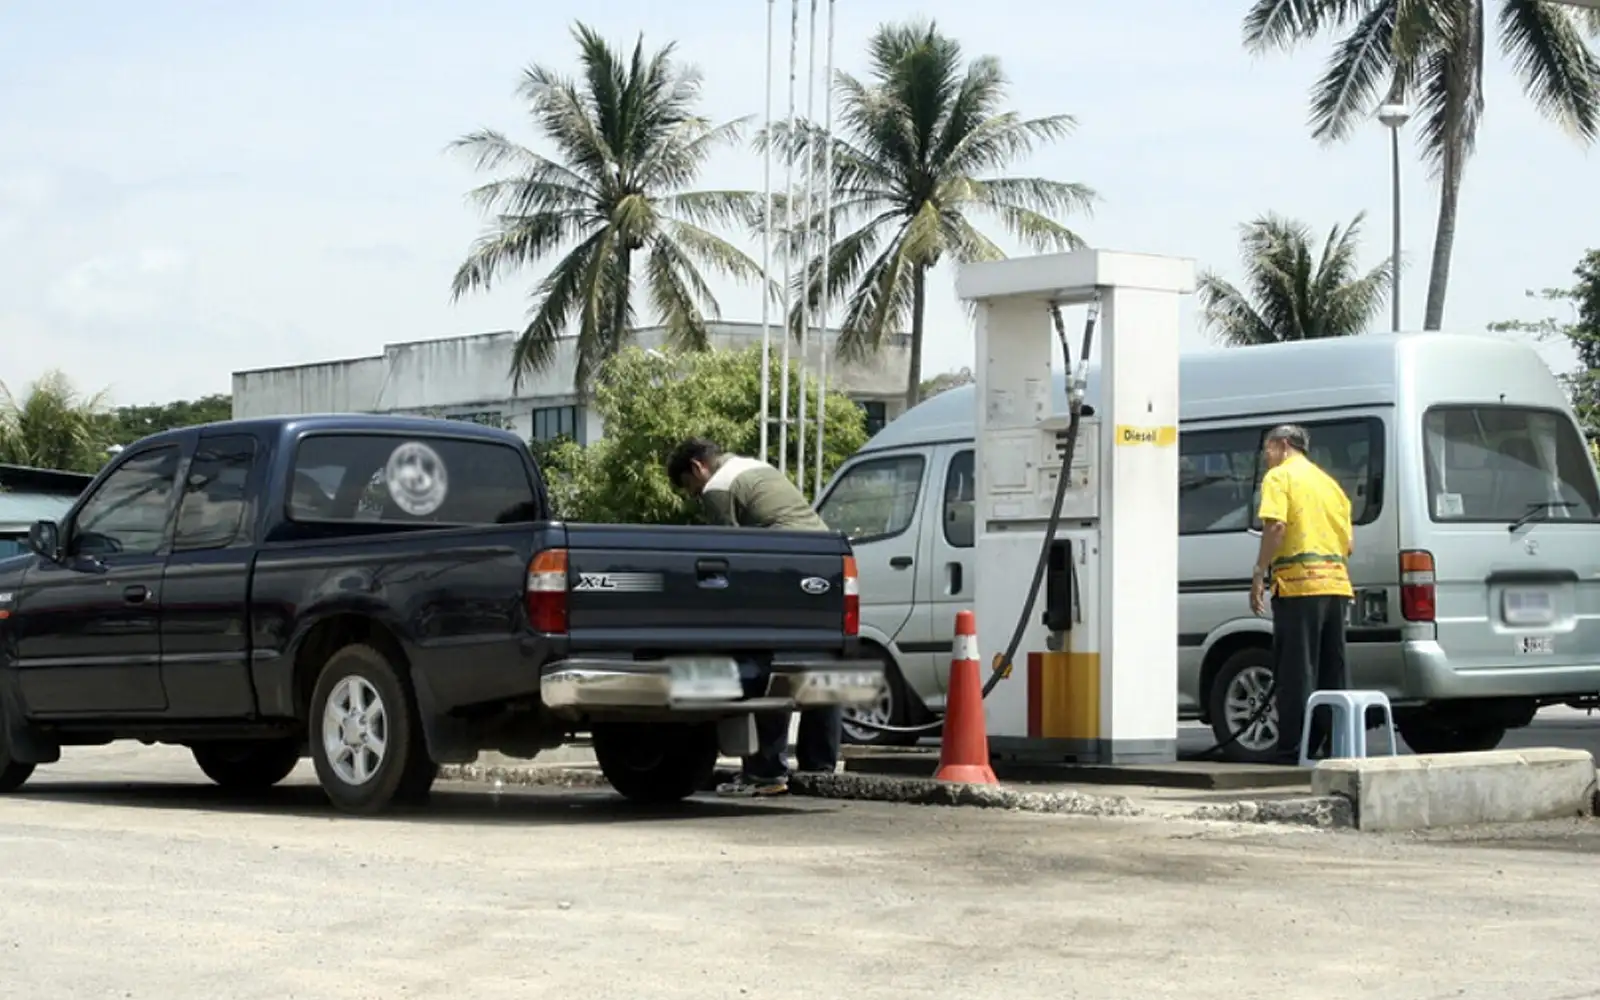 put targeted subsidy plan in place quickly to combat diesel smuggling, govt urged